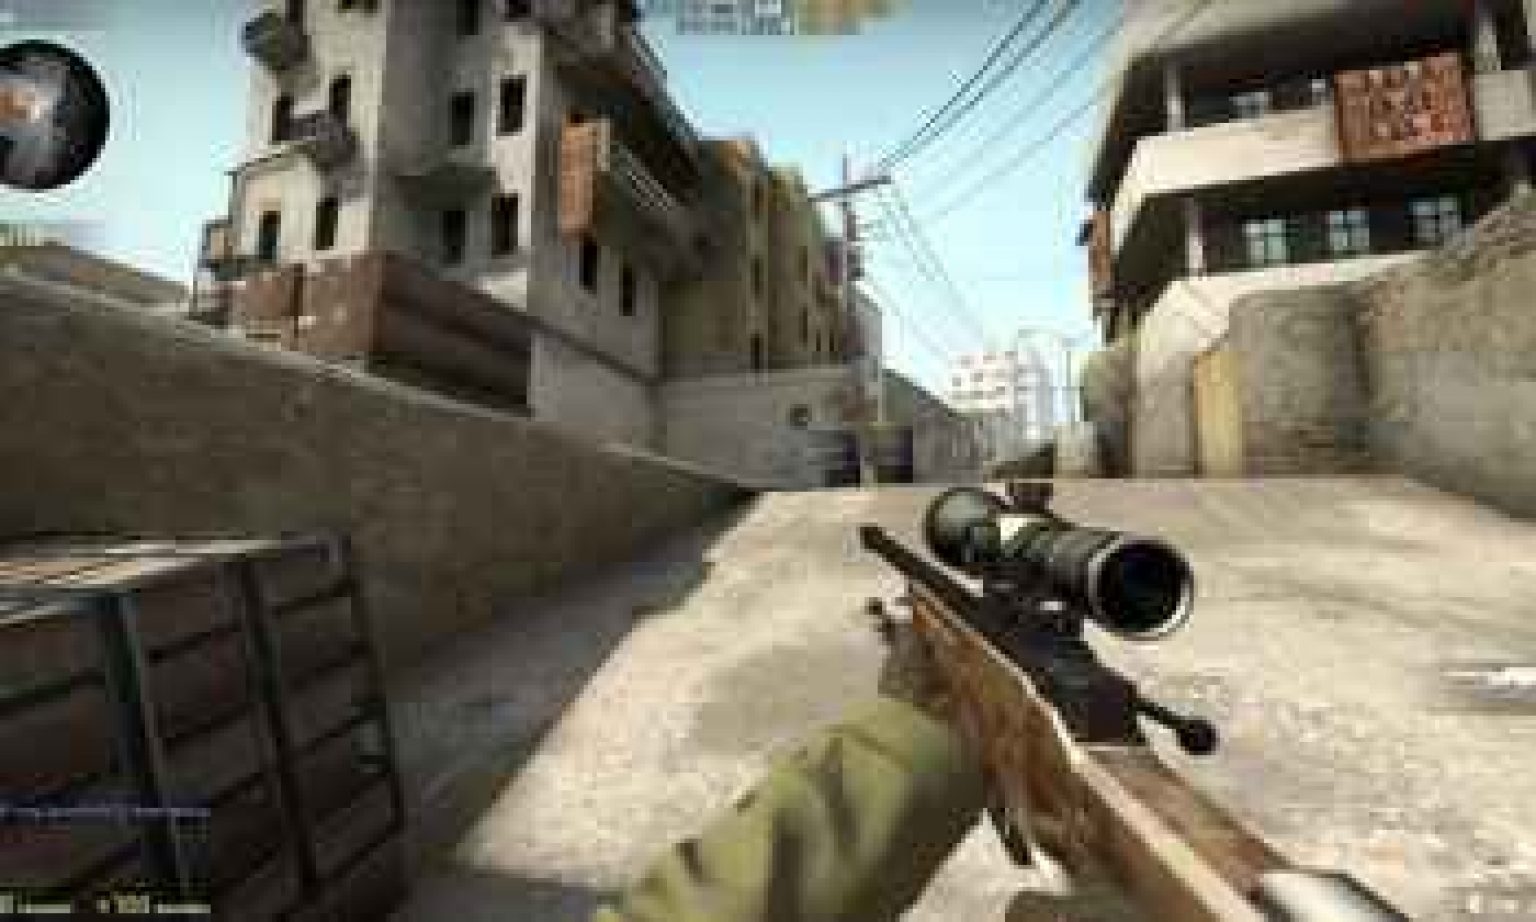 global offensive download